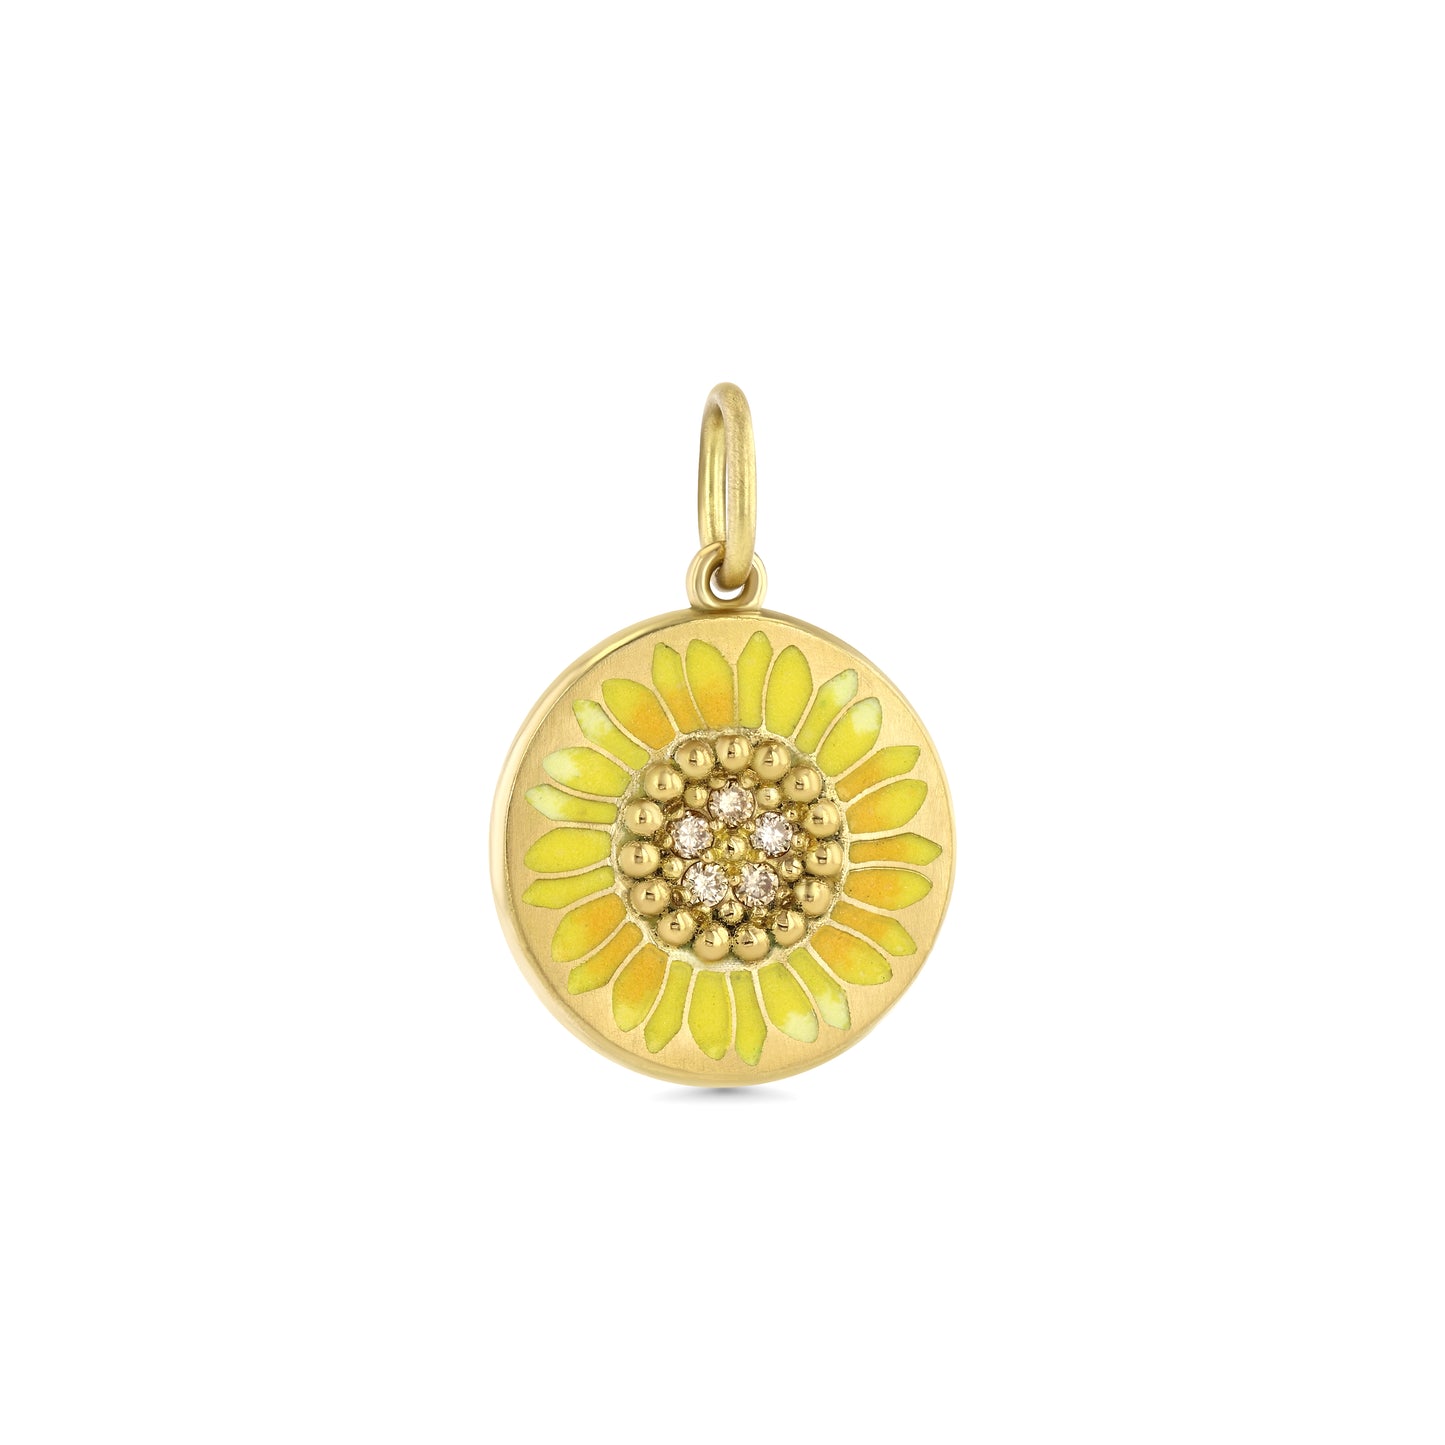 Load image into Gallery viewer, Gwen Barba Sunflower Pendant
